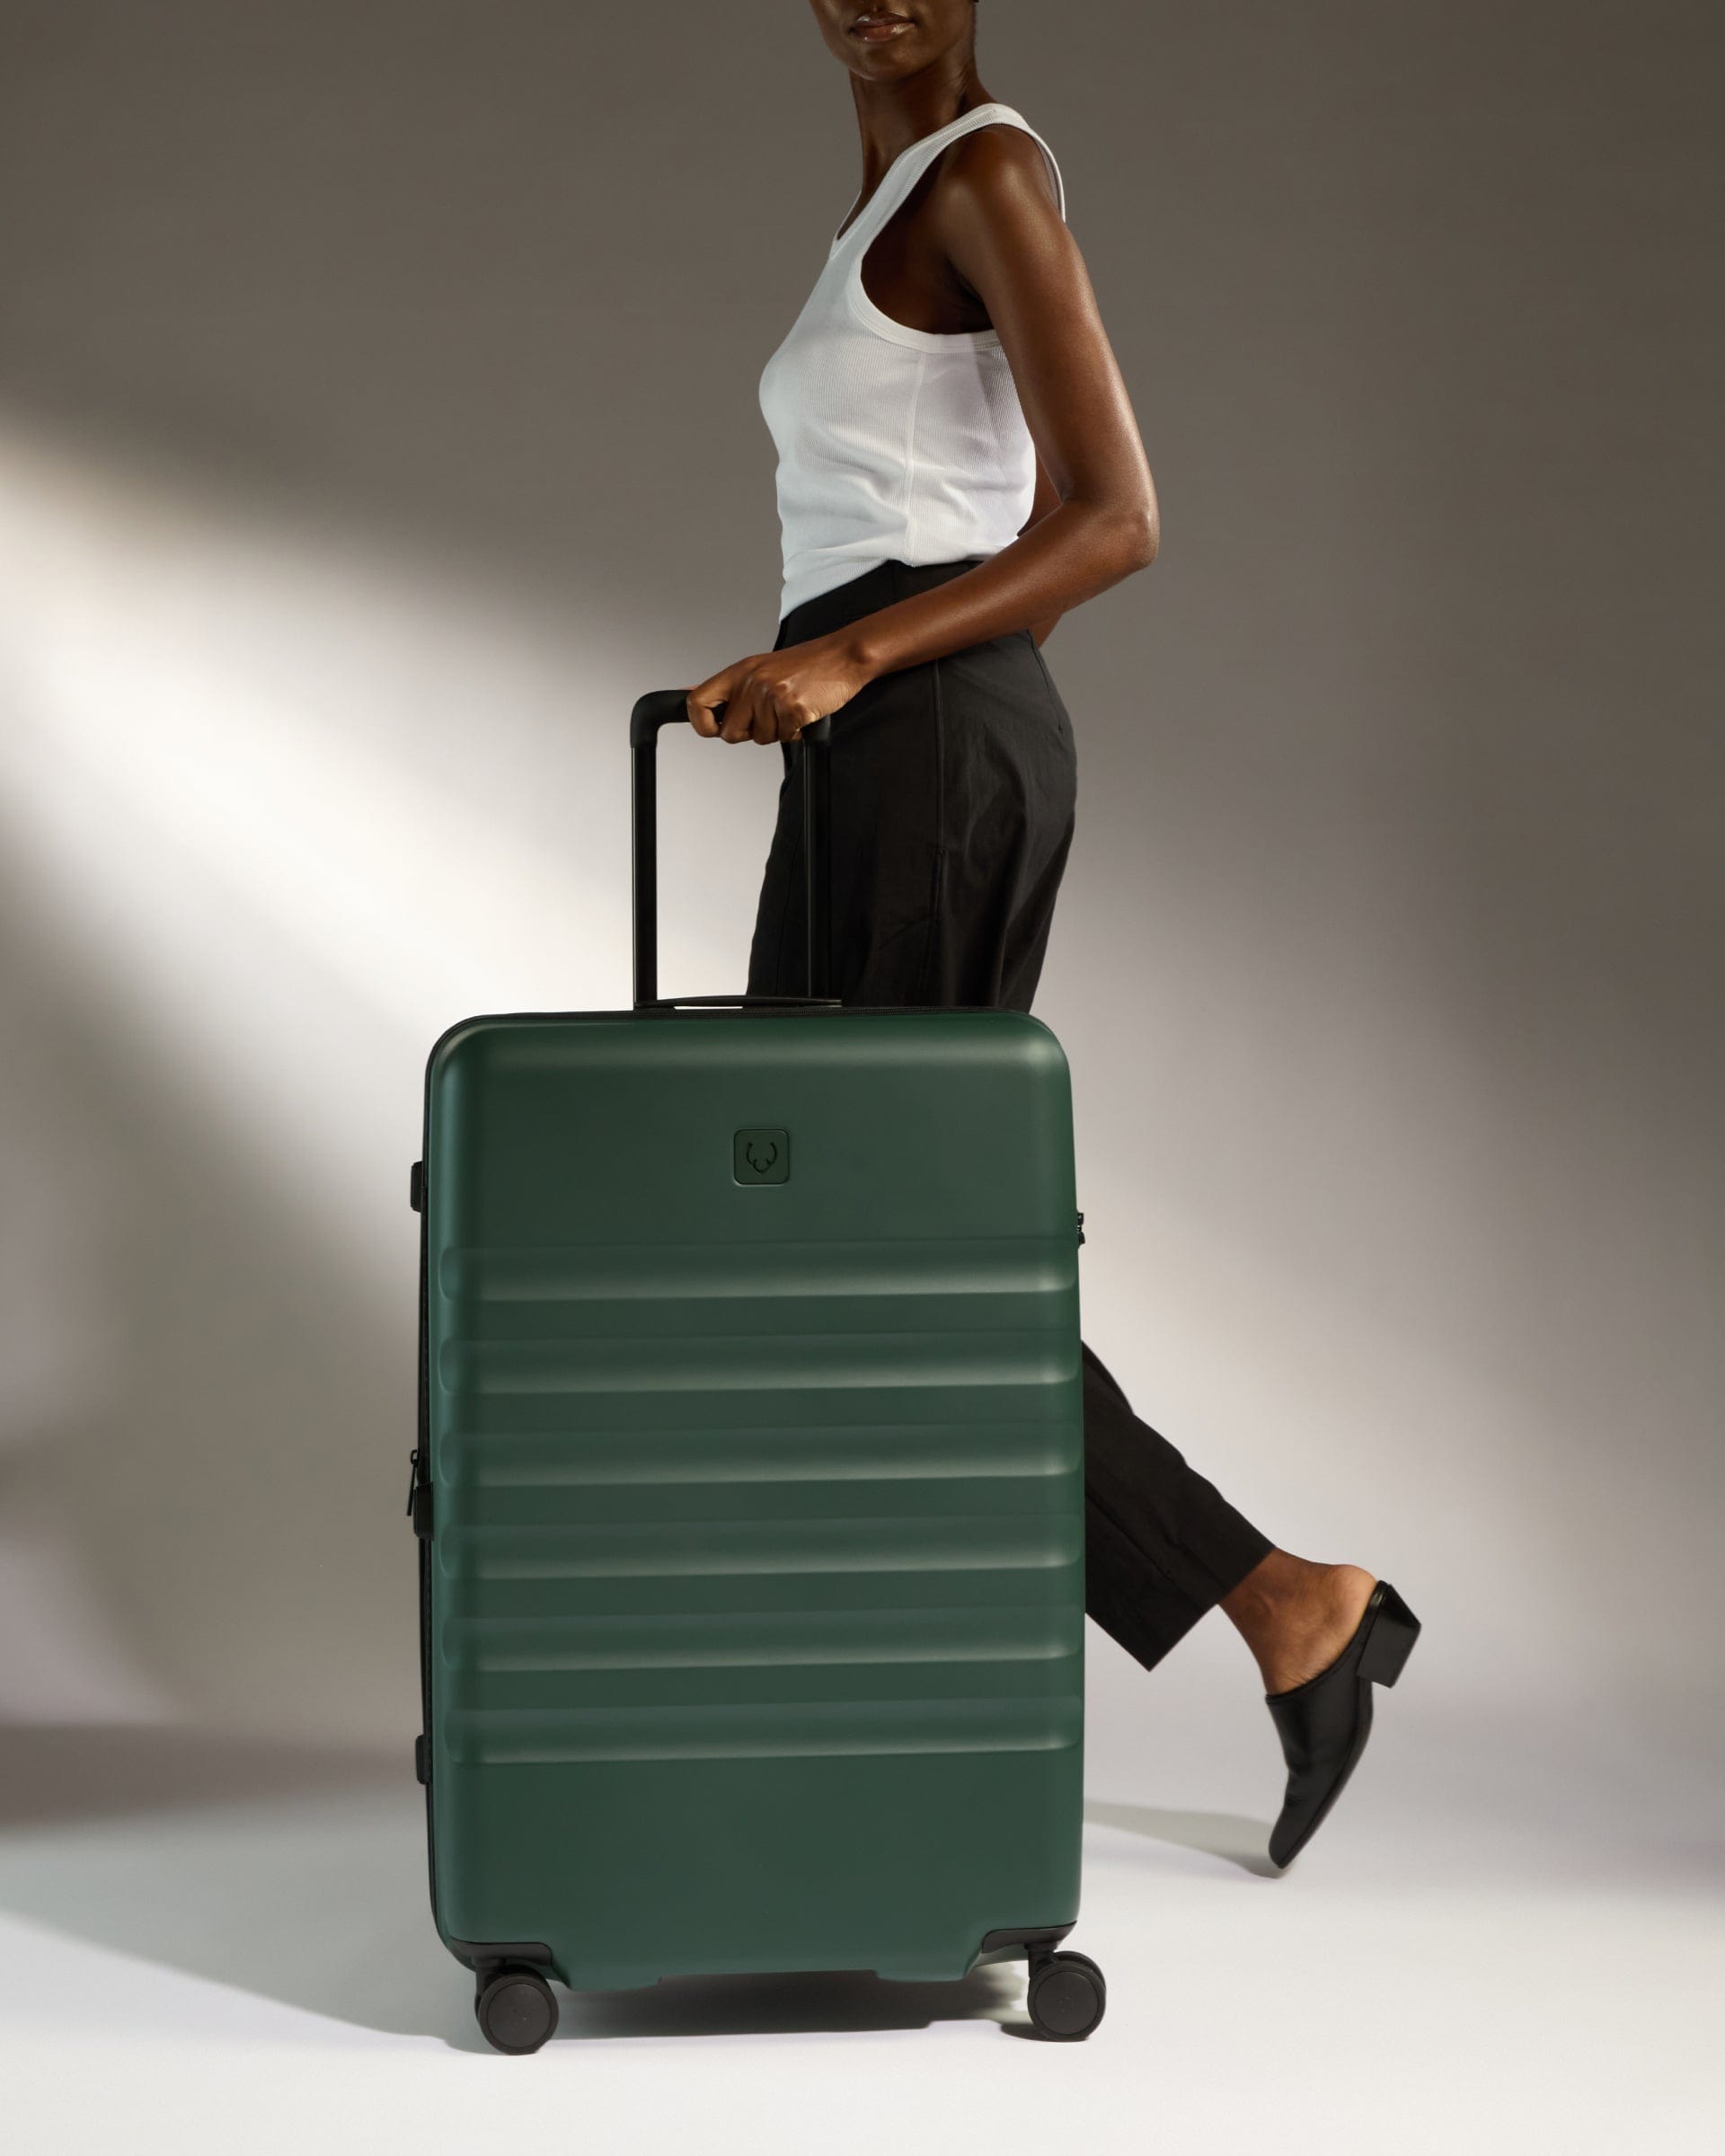 View Icon Stripe Large Suitcase In Antler Green Size 336cm x 78cm x 517cm information